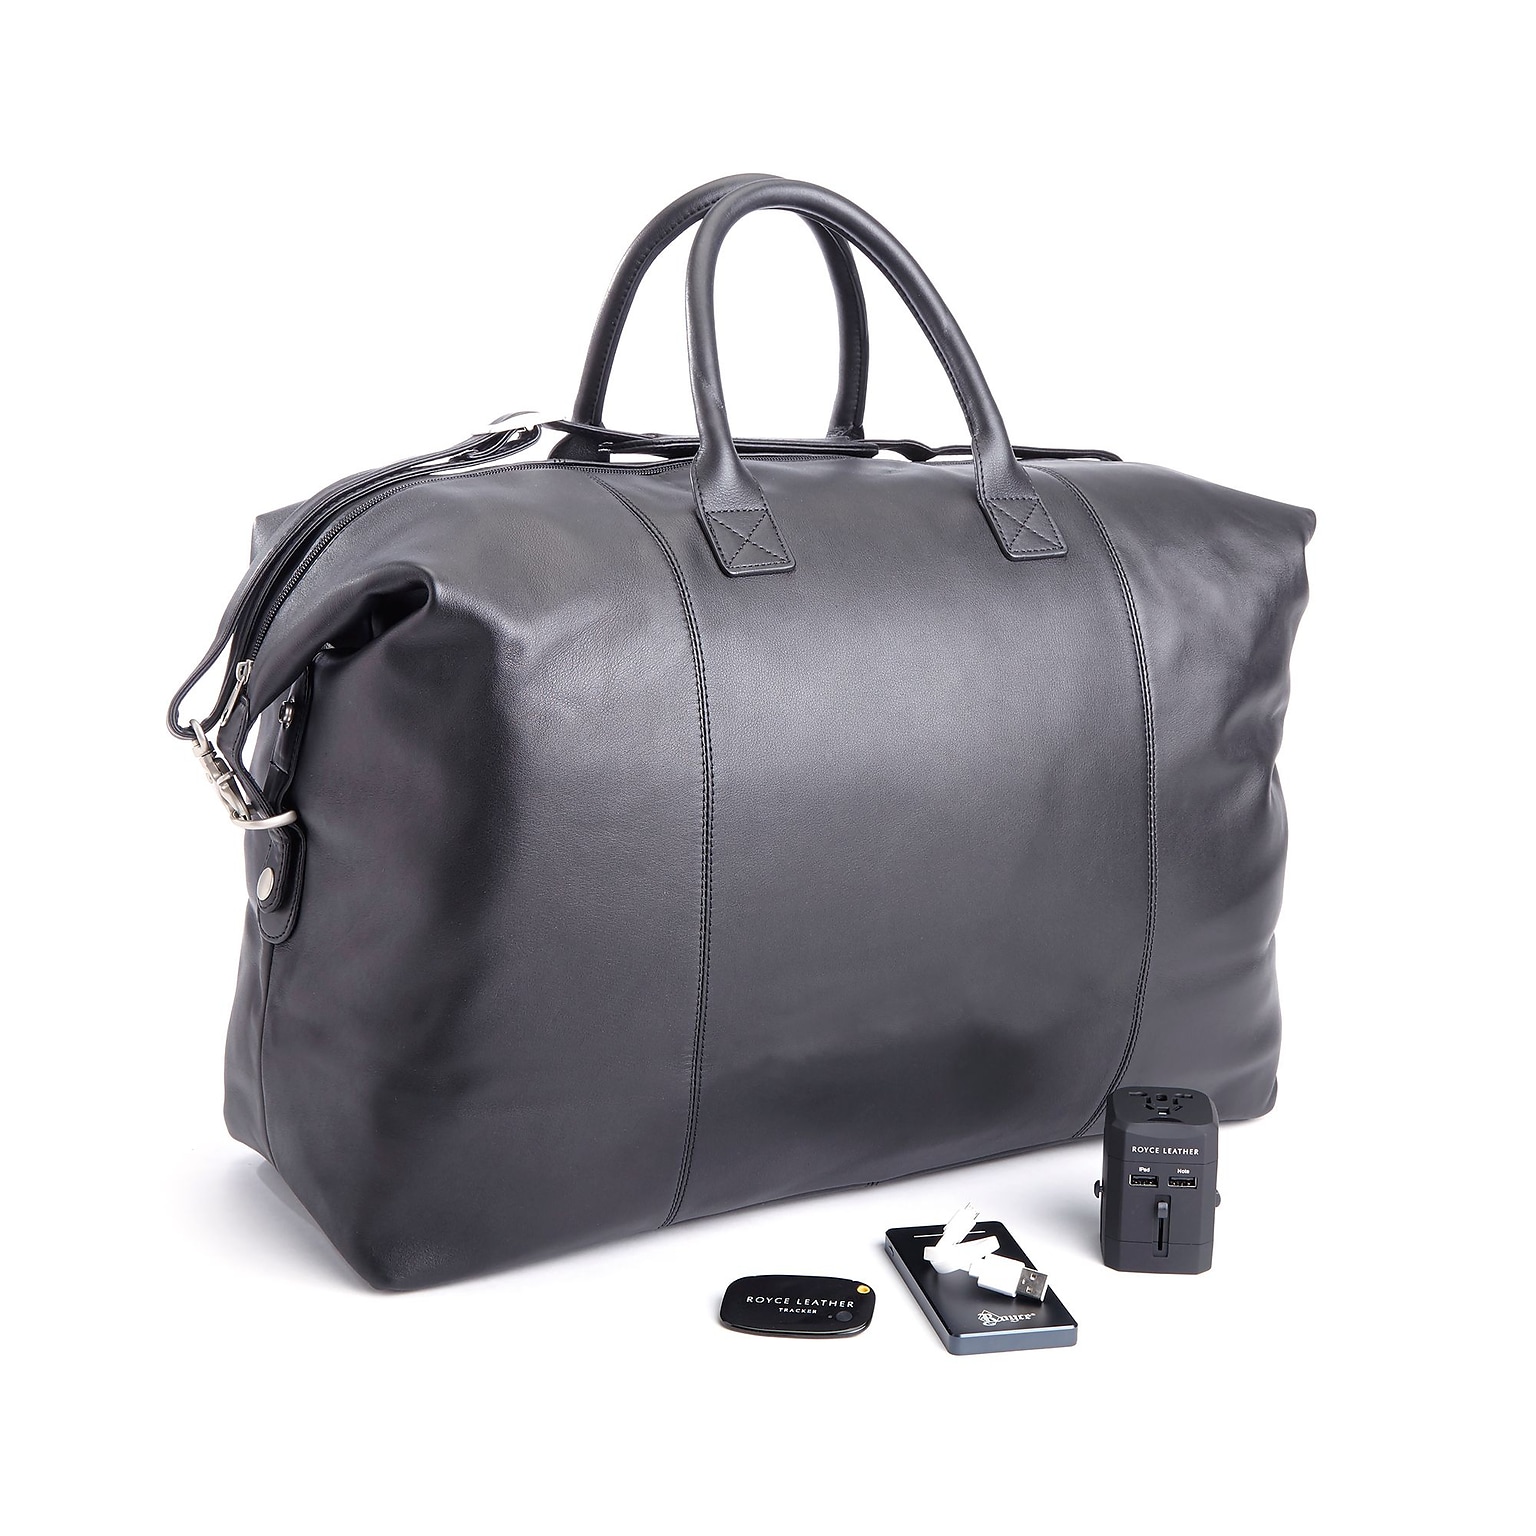 Royce Leather Leather Luxury Travel Set: Duffel Bag with Bluetooth Tracking, Portable Power Bank, & International Adapter